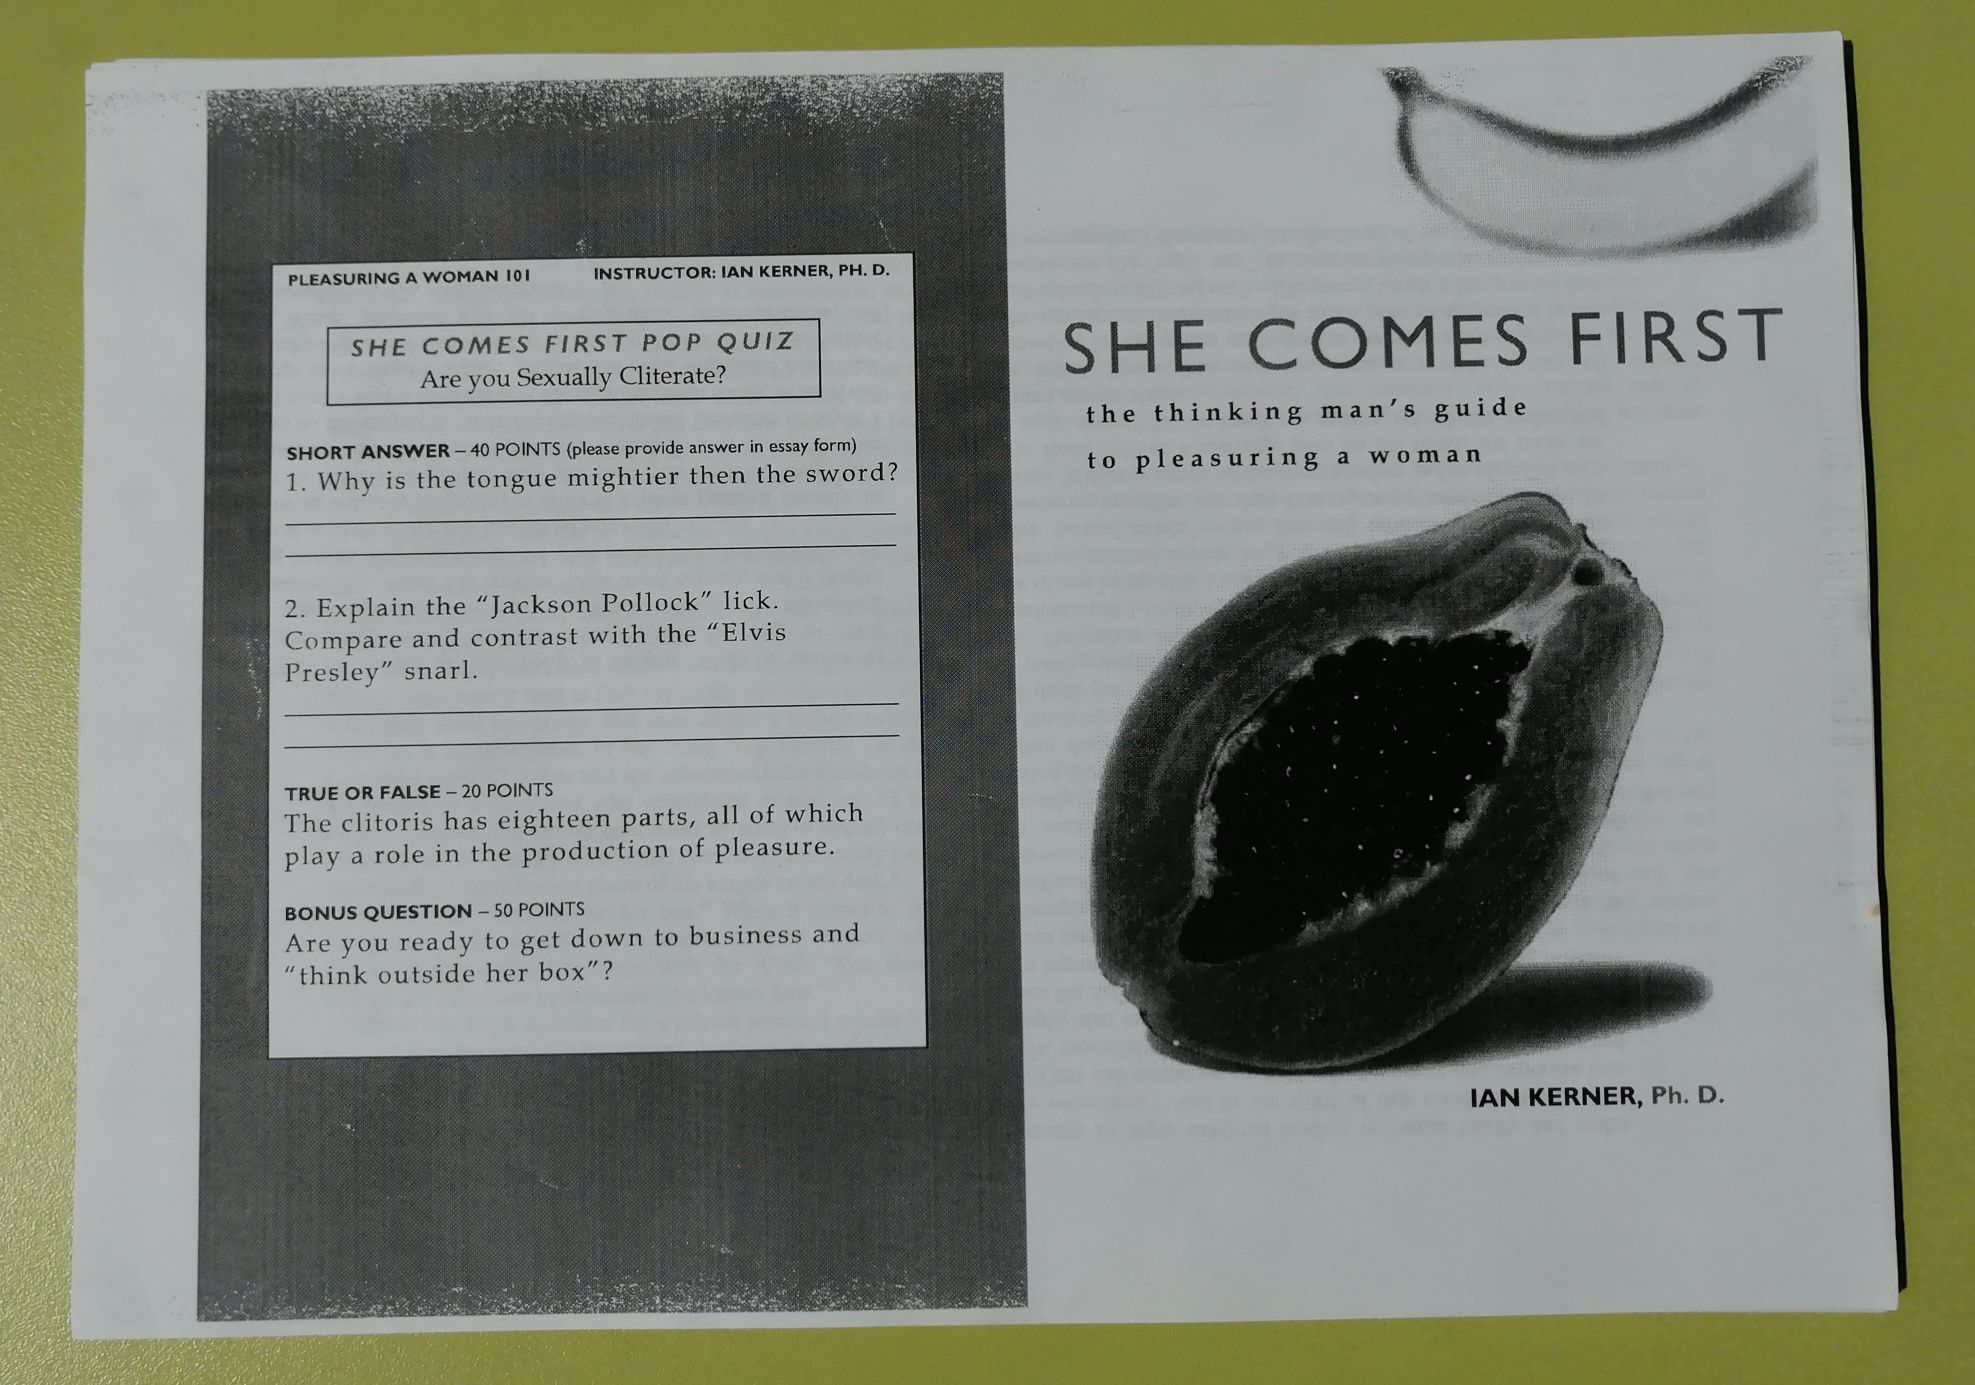 She comes first - Ian Kerner